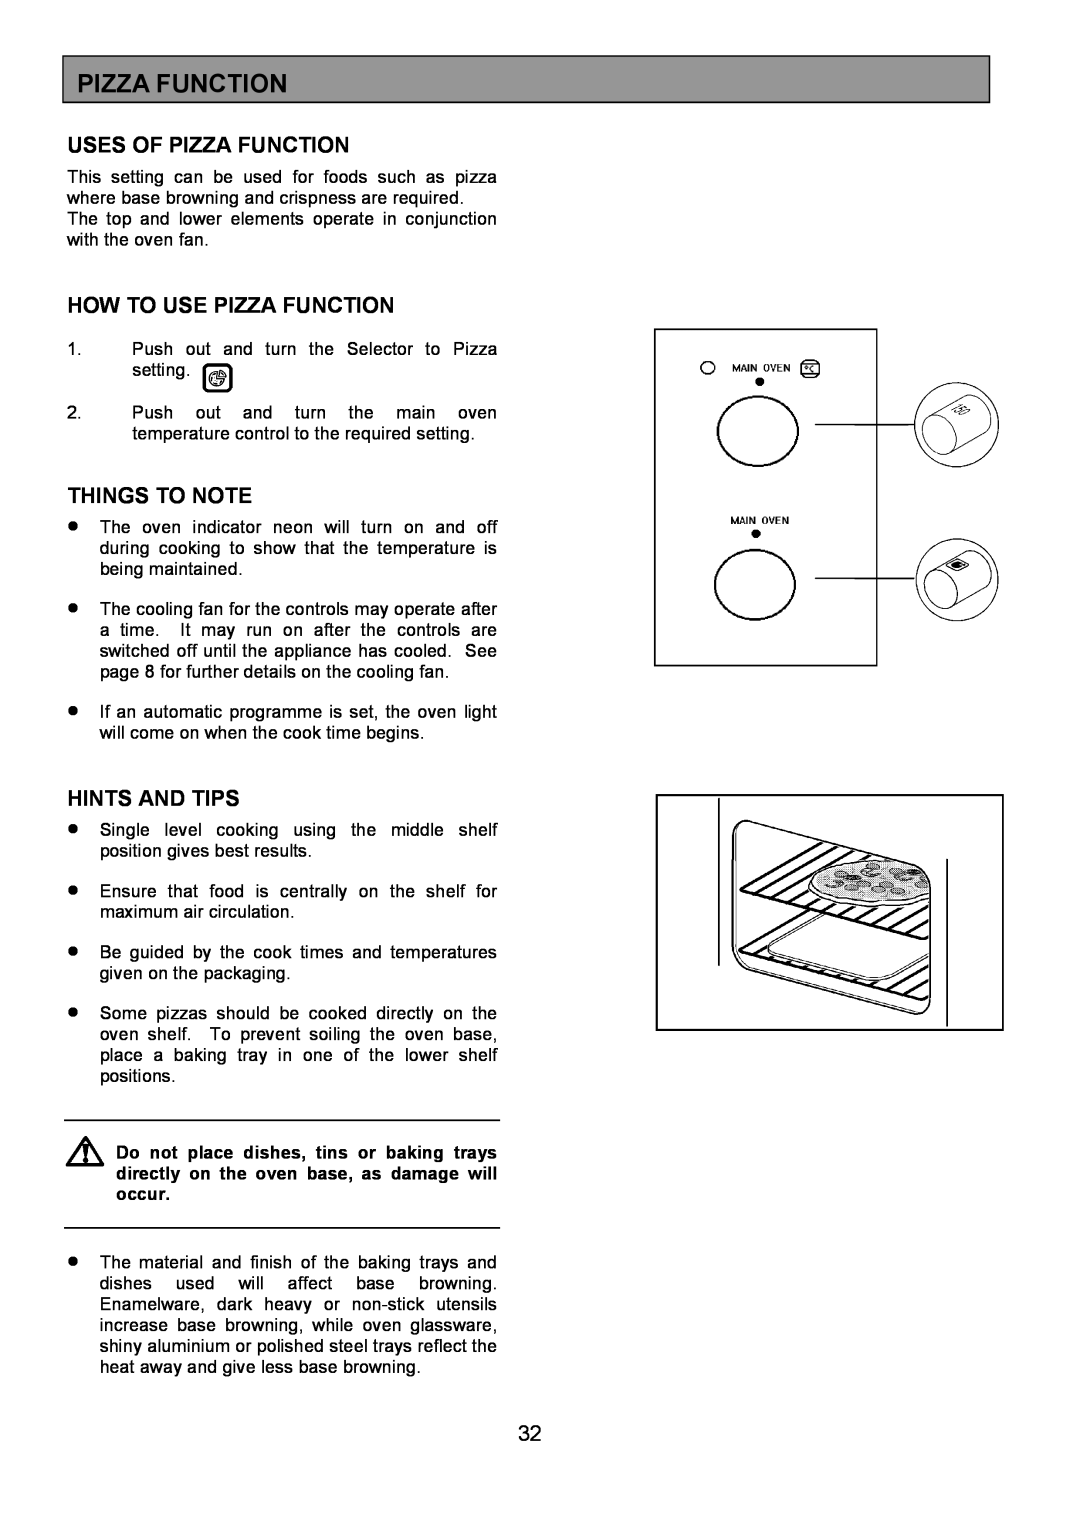 Zanussi 311608901 manual Uses Of Pizza Function, How To Use Pizza Function, Things To Note, Hints And Tips 